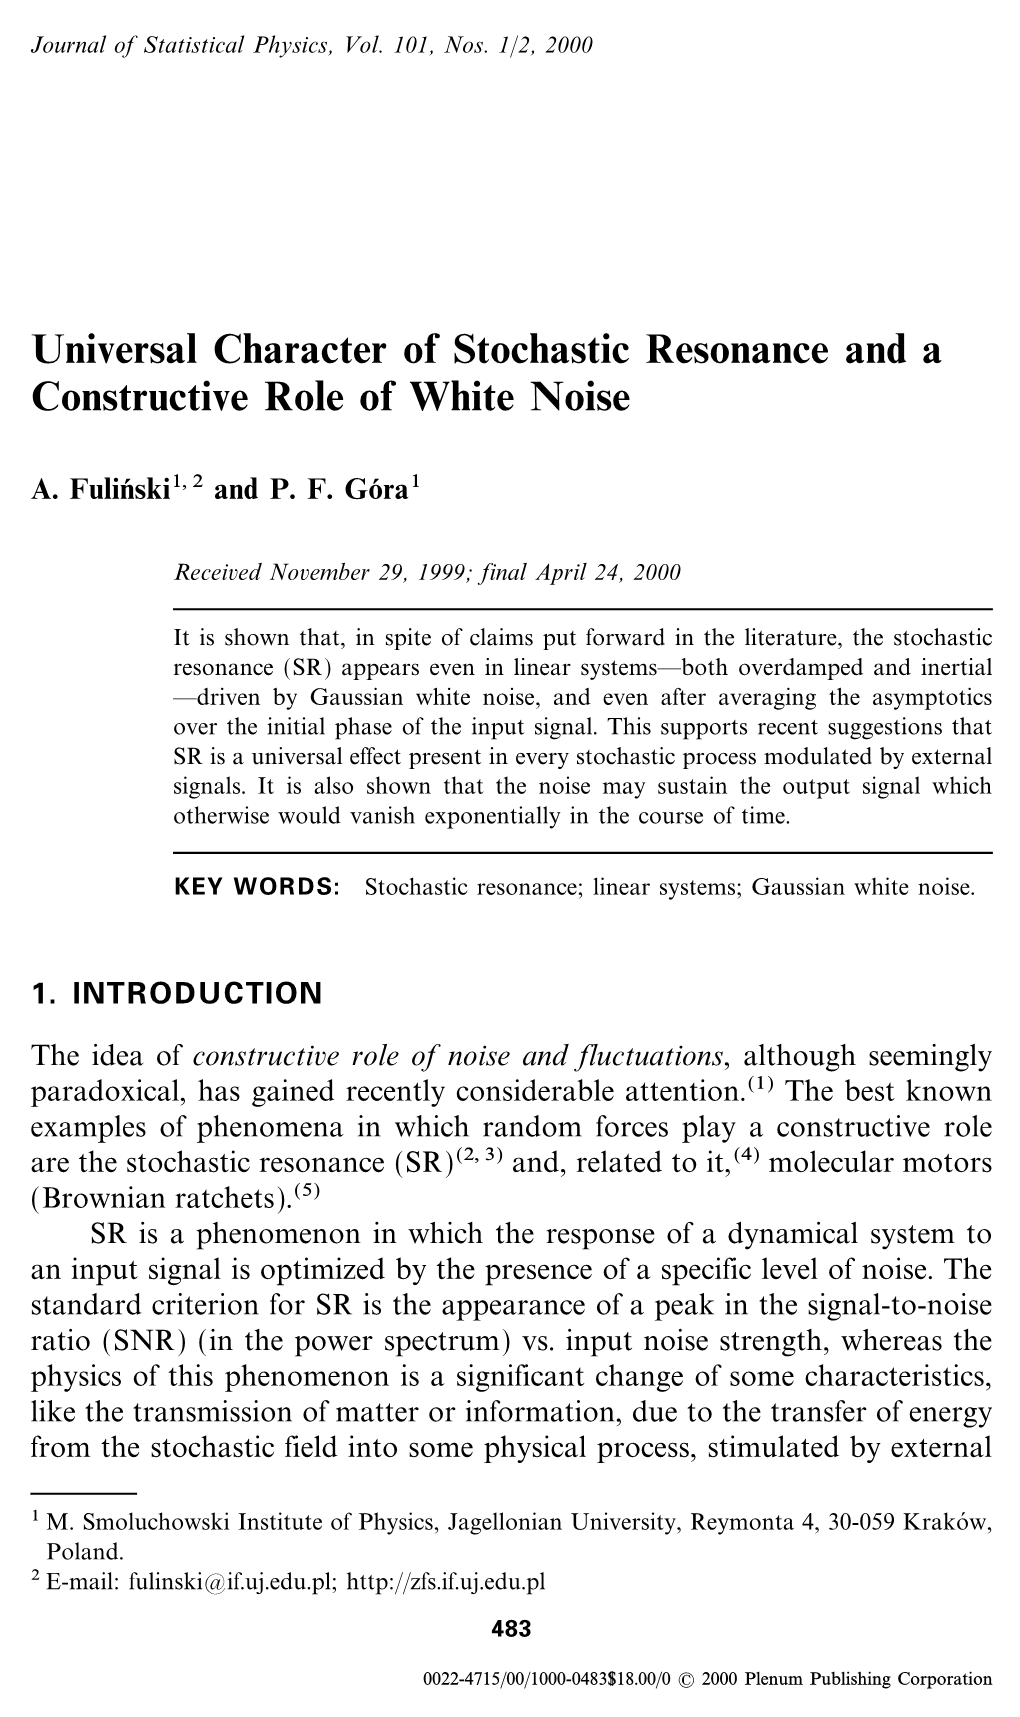 Universal Character of Stochastic Resonance and a Constructive Role of White Noise